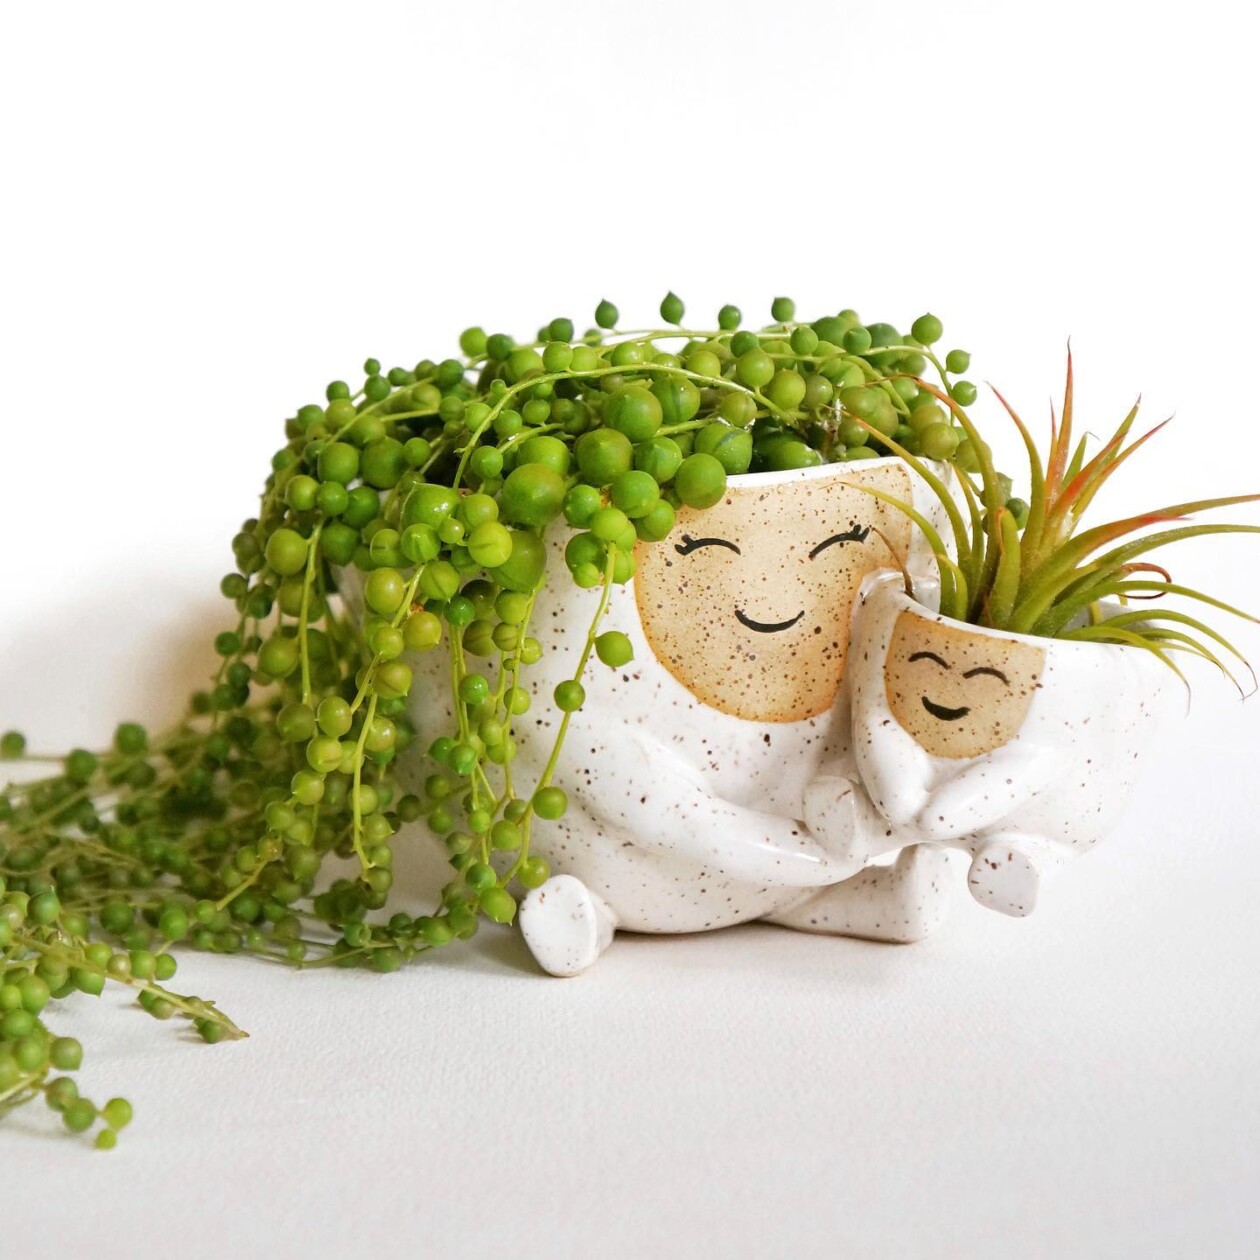 Amusing And Adorable Anthropomorphic Planters By Abby Ozaltug (5)